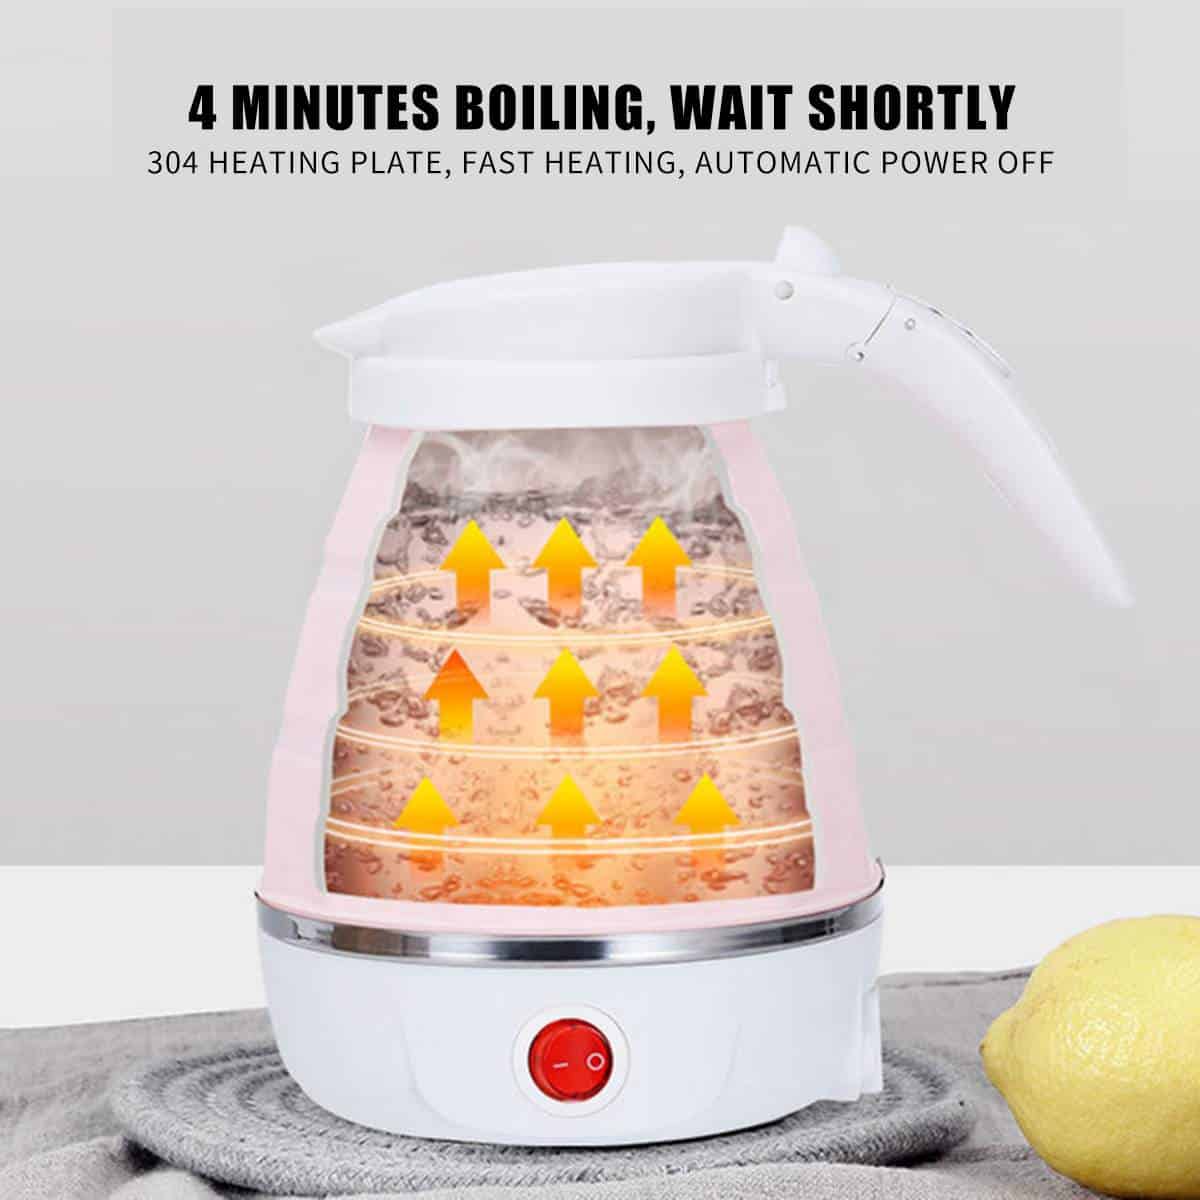 0.6L Electric Kettle Safety Silicone Foldable Portable Travel Camping Water Boiler Heater 220V 700W Mini Home Electric Appliance